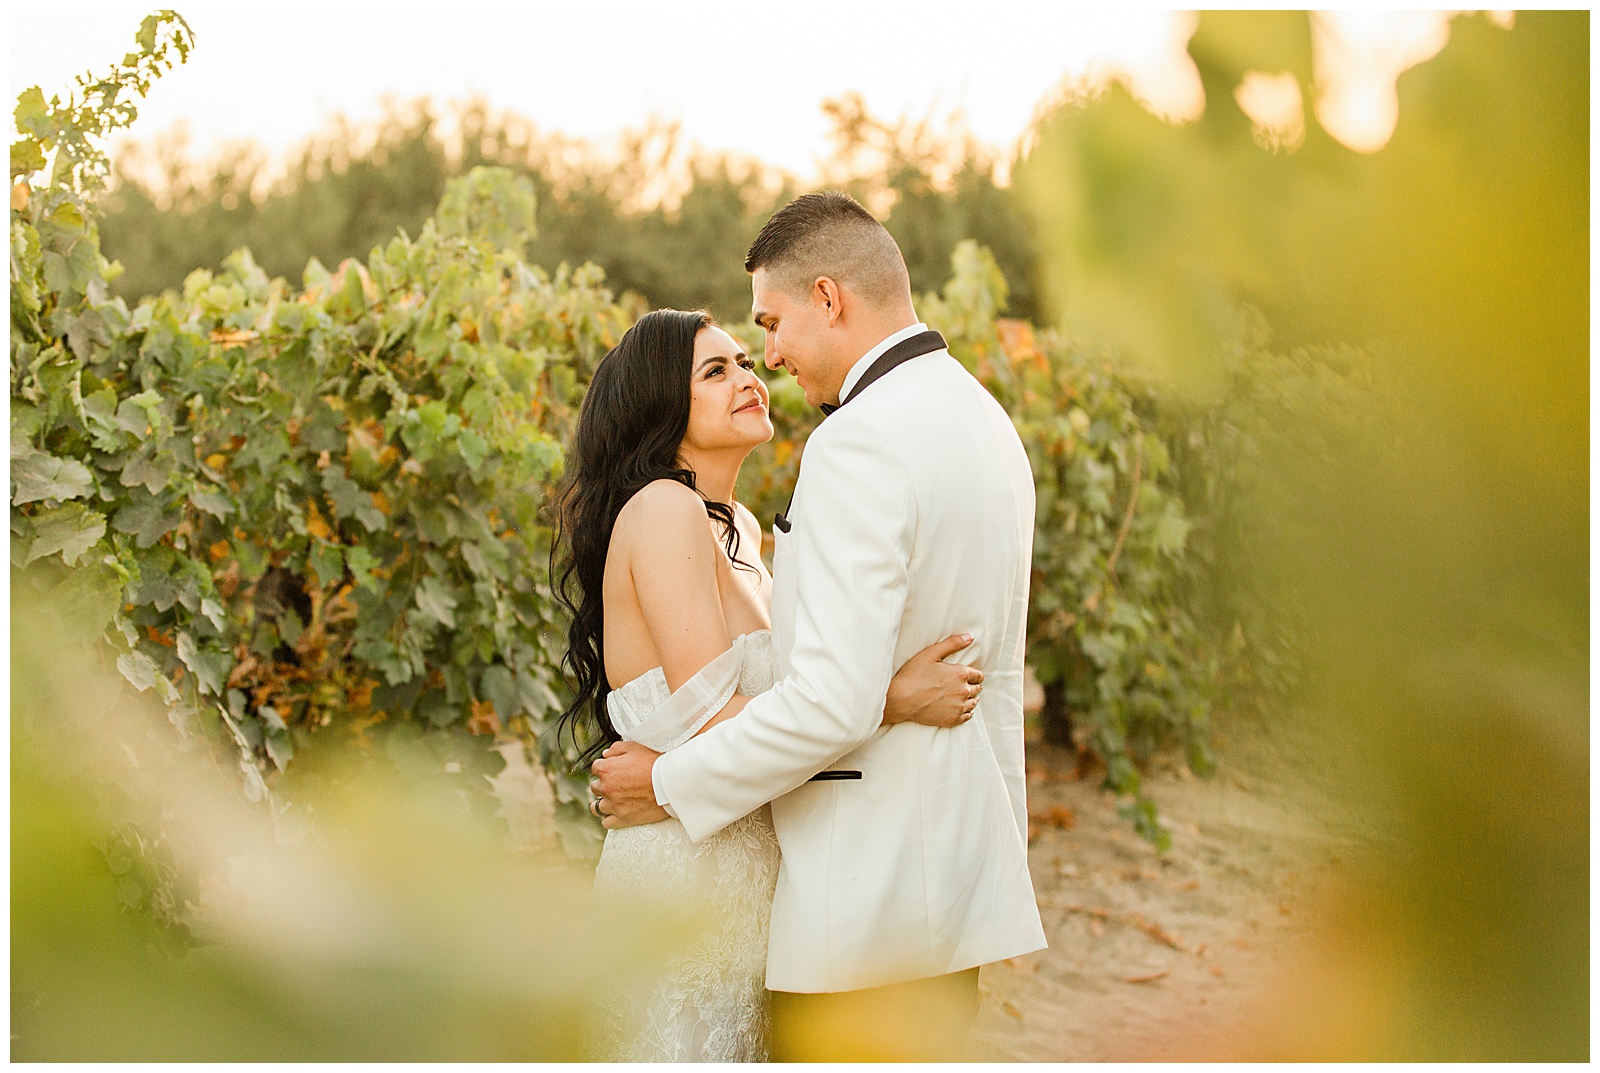 bride and groom rubbing their noses together while smiling in a vineyard at sunset